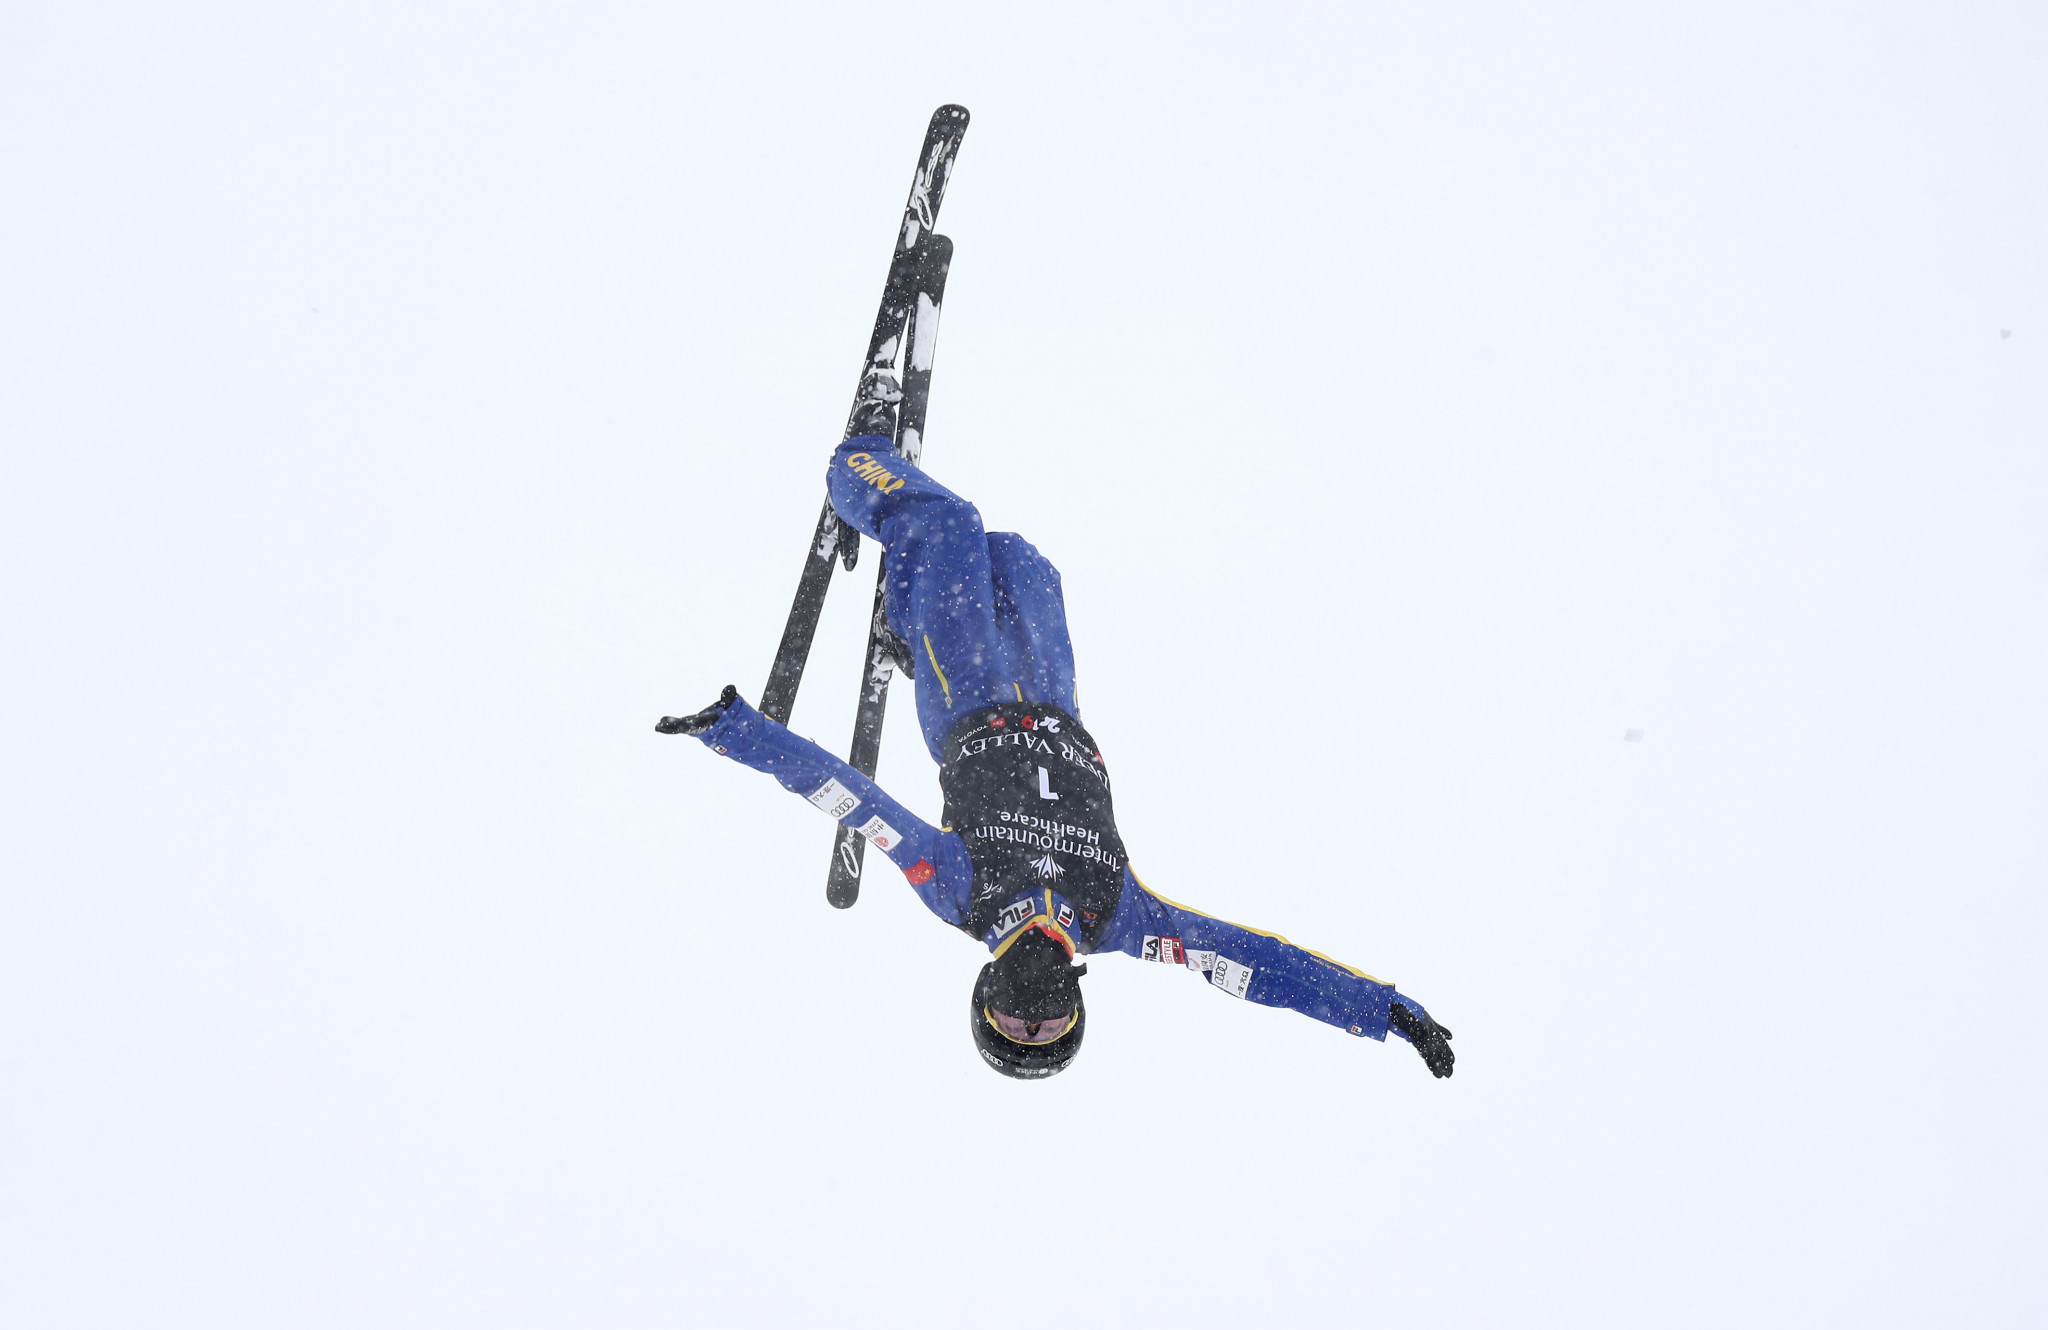 Xu and Wang wrap up overall titles at FIS Aerials World Cup